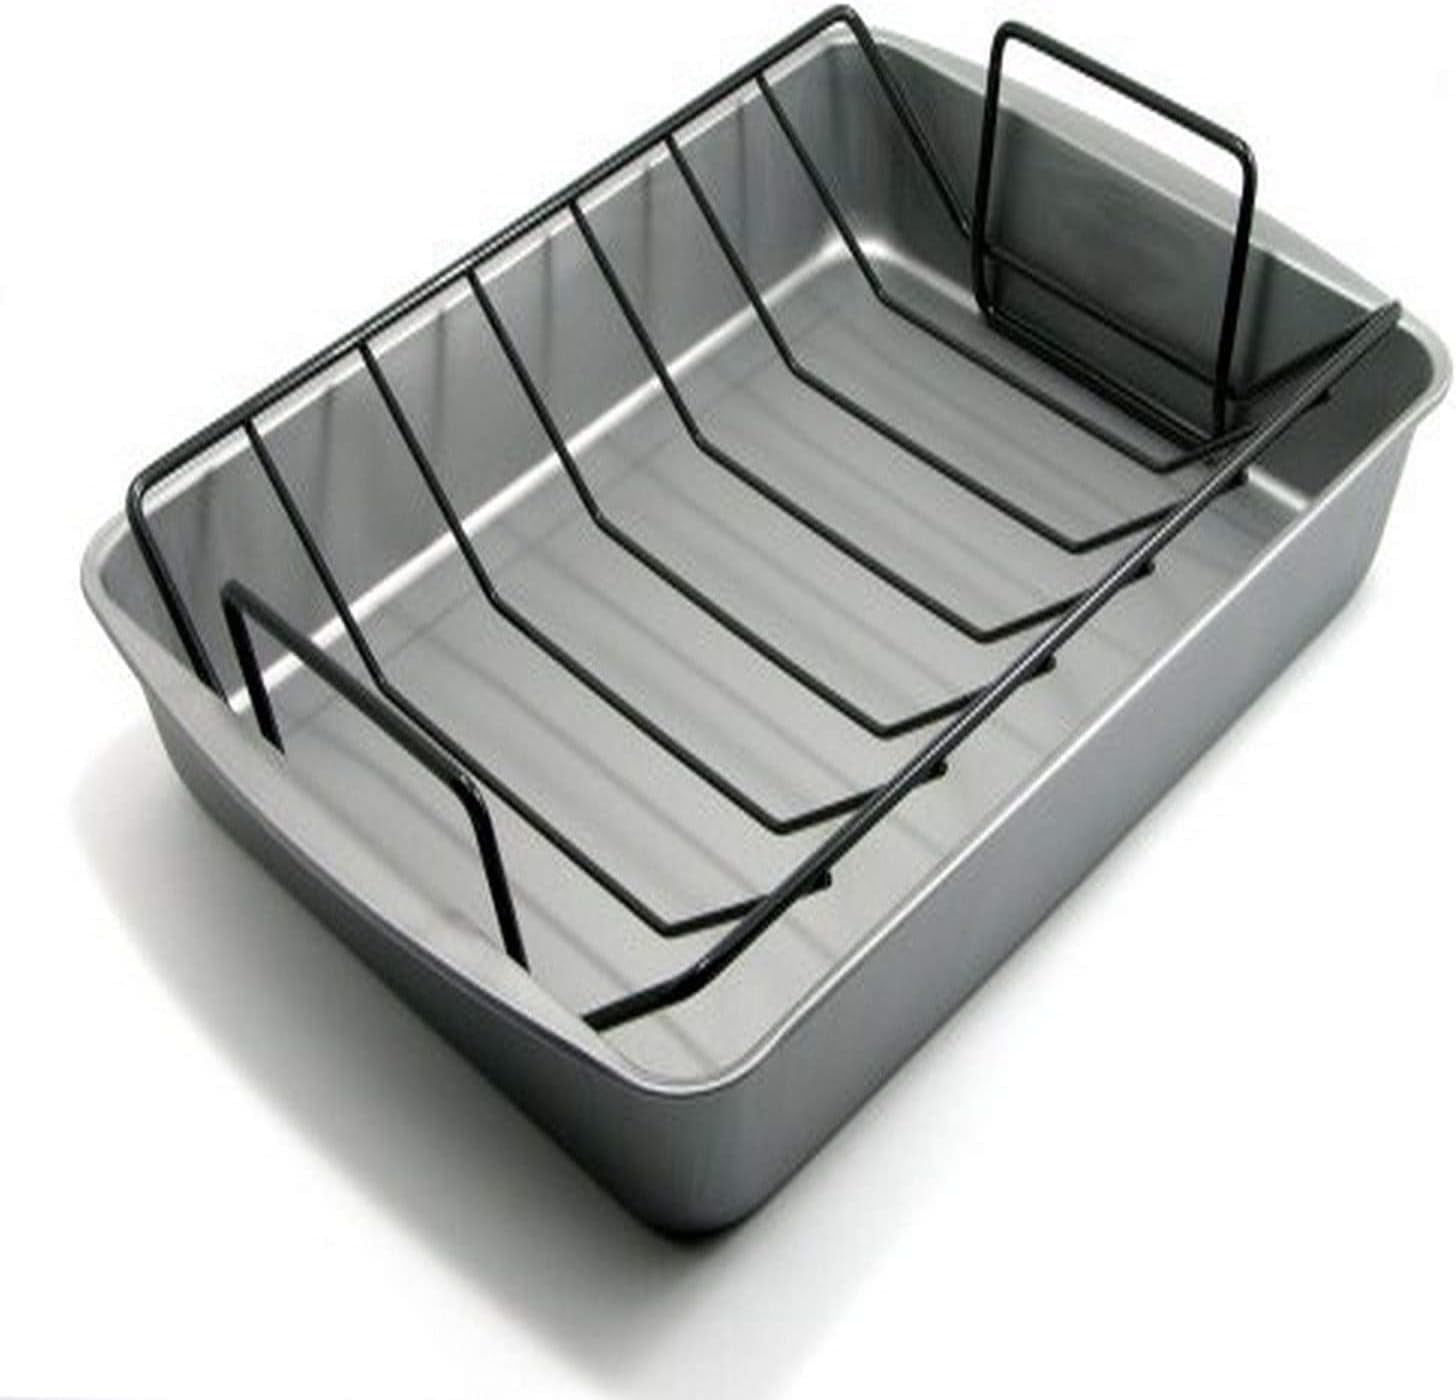 OvenStuff Non-Stick Large Roasting Pan with Rack - DuraGlide Non-Stick Roasting  Pan with Handles for Easy Lifting, Easy to Clean 